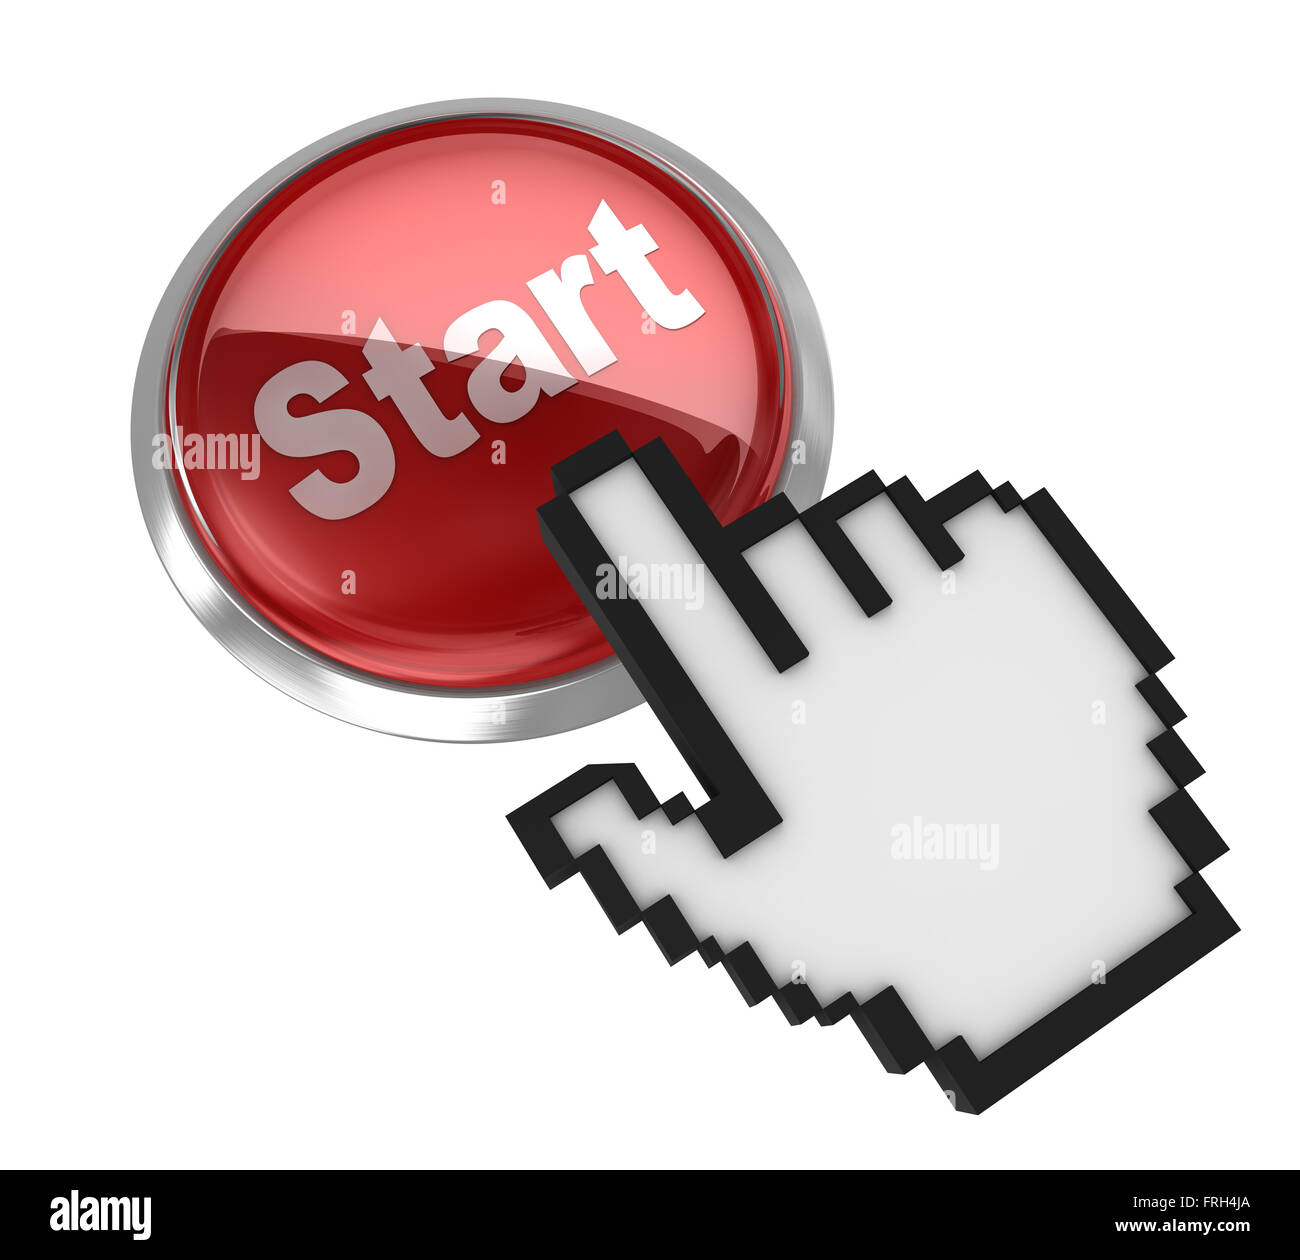 Start button and hand cursor. Stock Photo